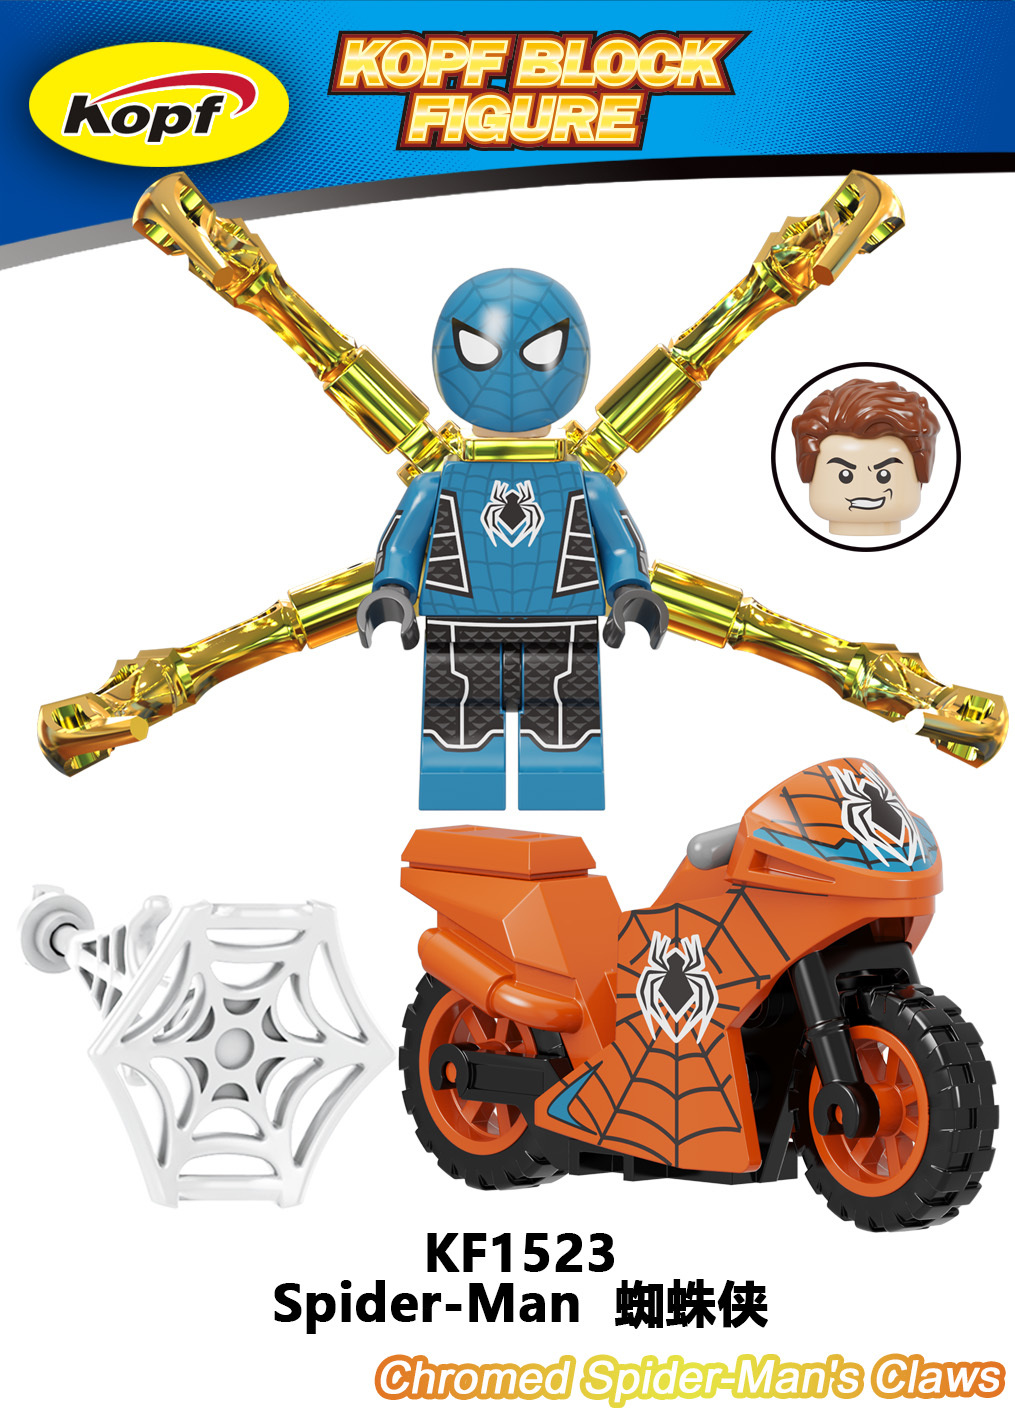 KF1517 KF1518 KF1519 KF1520 KF1521 KF1522 KF1523 KF1524 KF6137 KF6090 Bricks Building Blocks Spider Man Action Figures Educational Toys For Children's Gifts